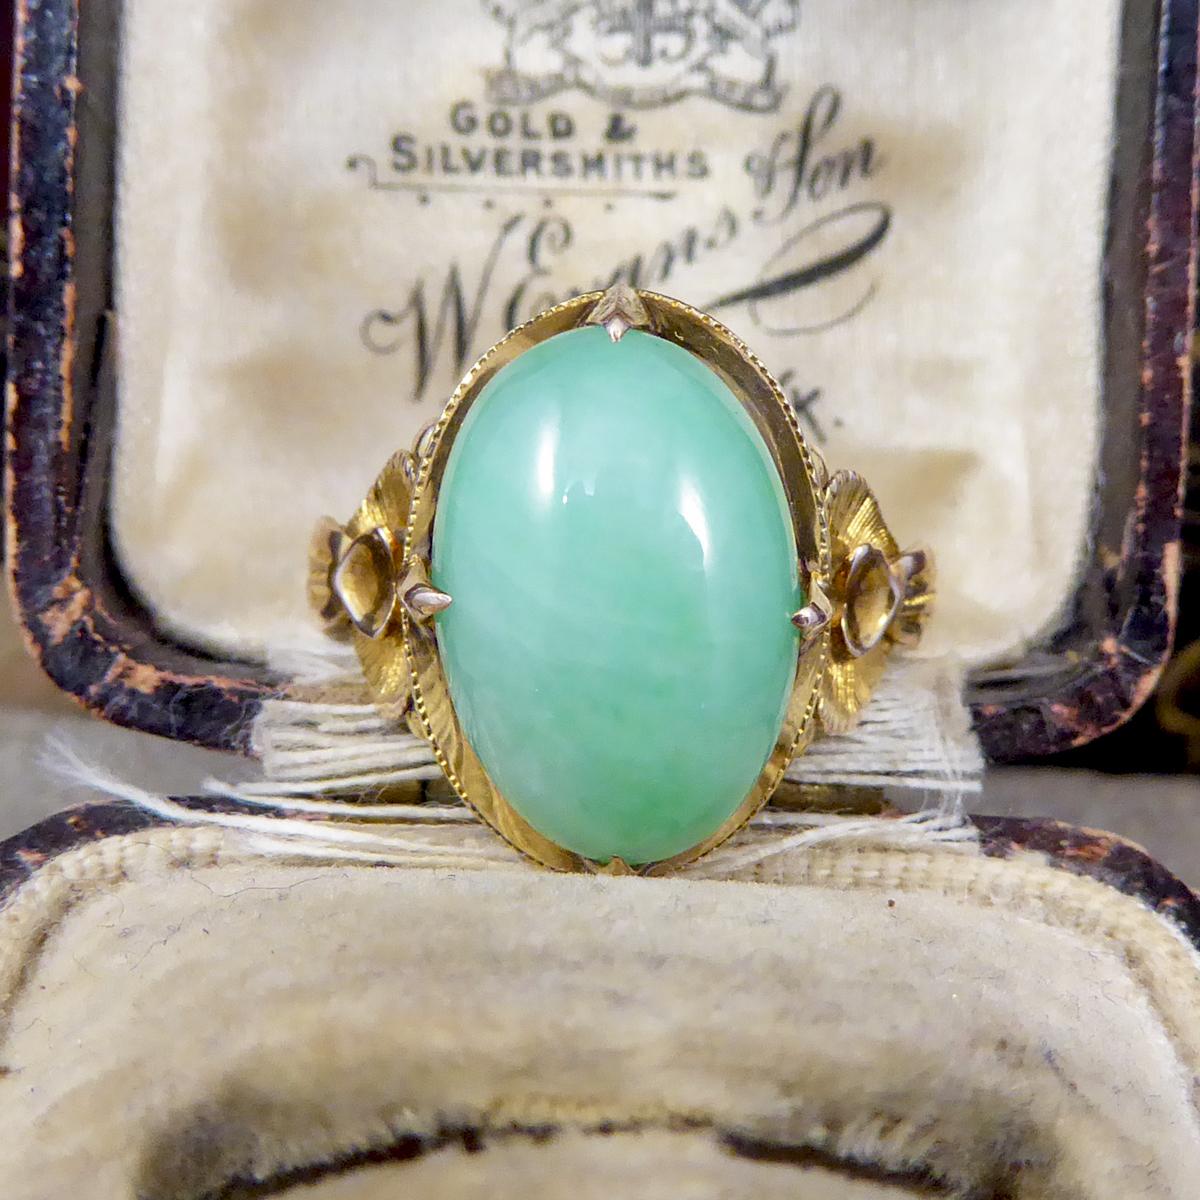 Vintage Oval Jade Ring in 14 Carat Yellow Gold with Decorative Shoulders 1